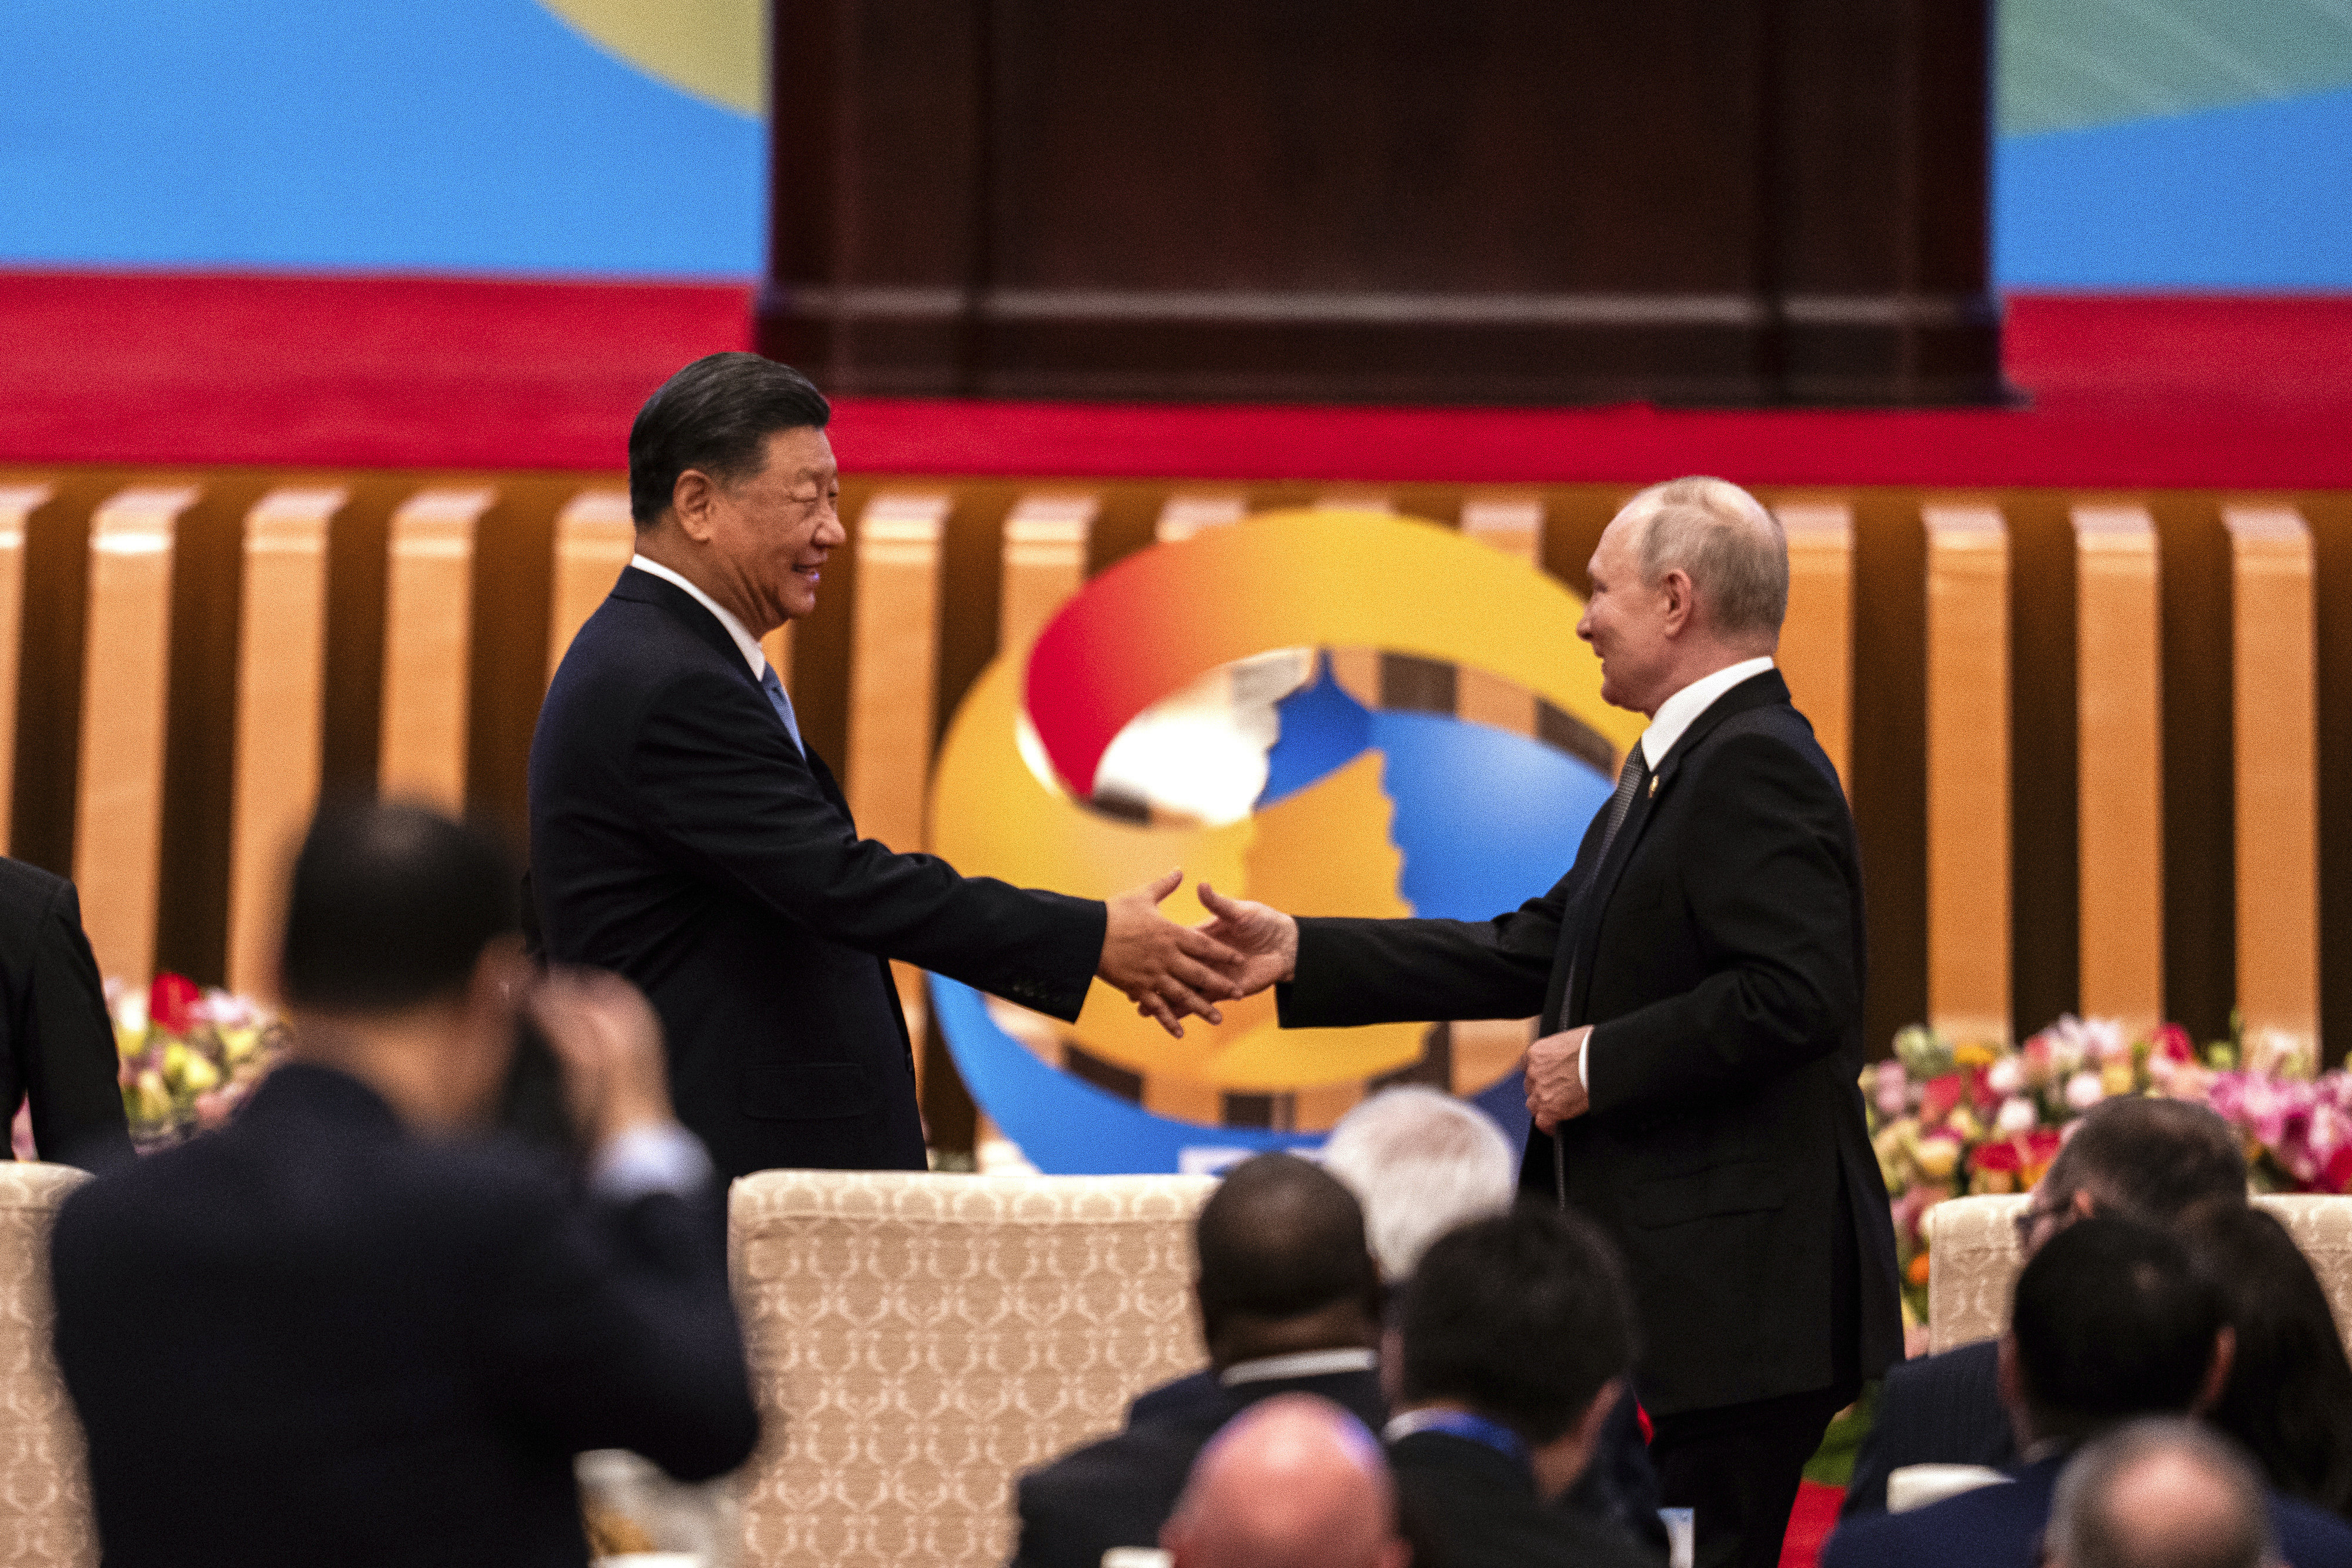 China’s relationship with Russia has come under greater scrutiny and criticism in the wake of the latter country’s invasion of Ukraine. Photo: AP